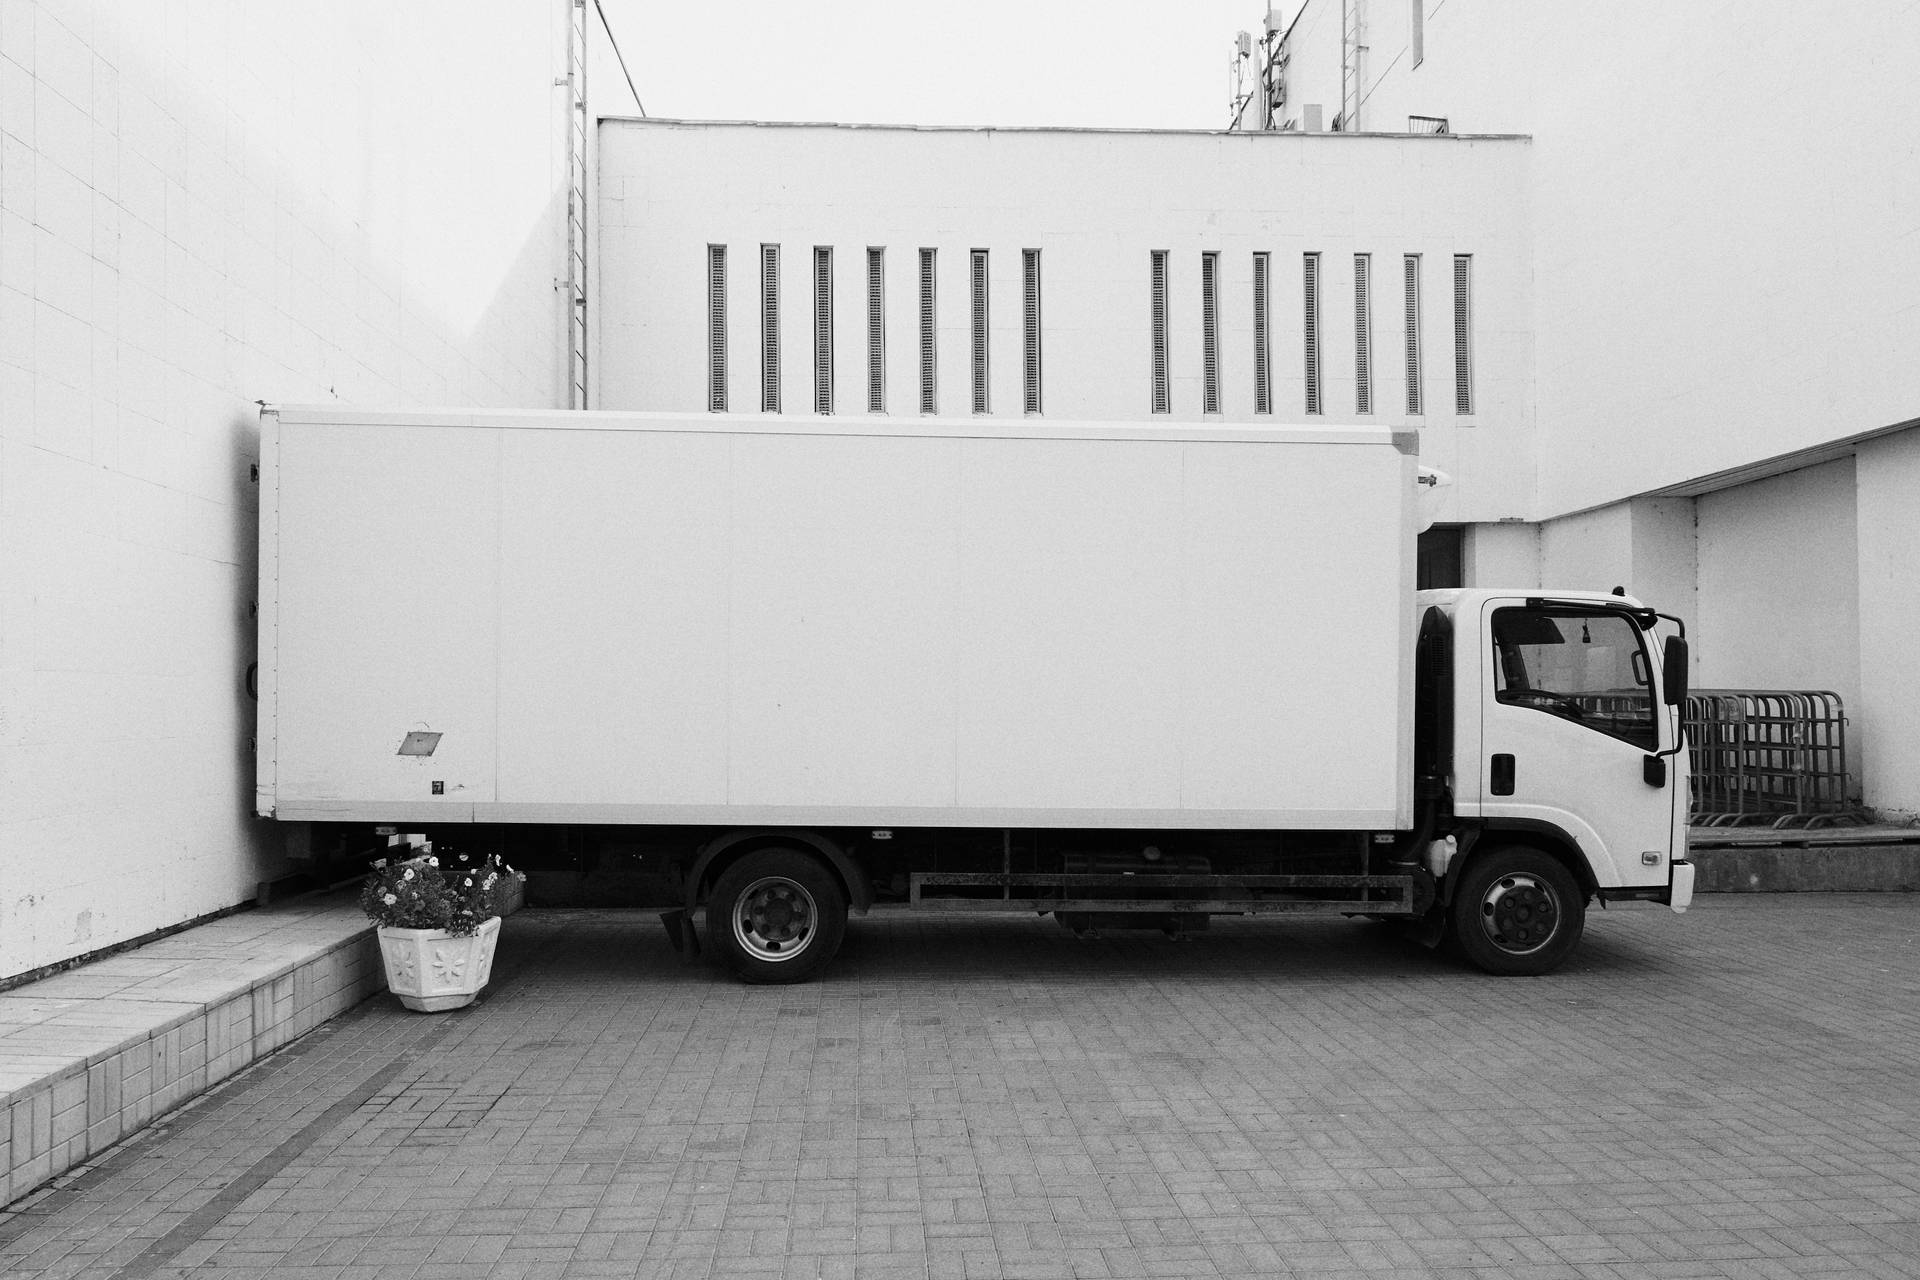 Majestic Trailer Truck Parked At A Commercial Building